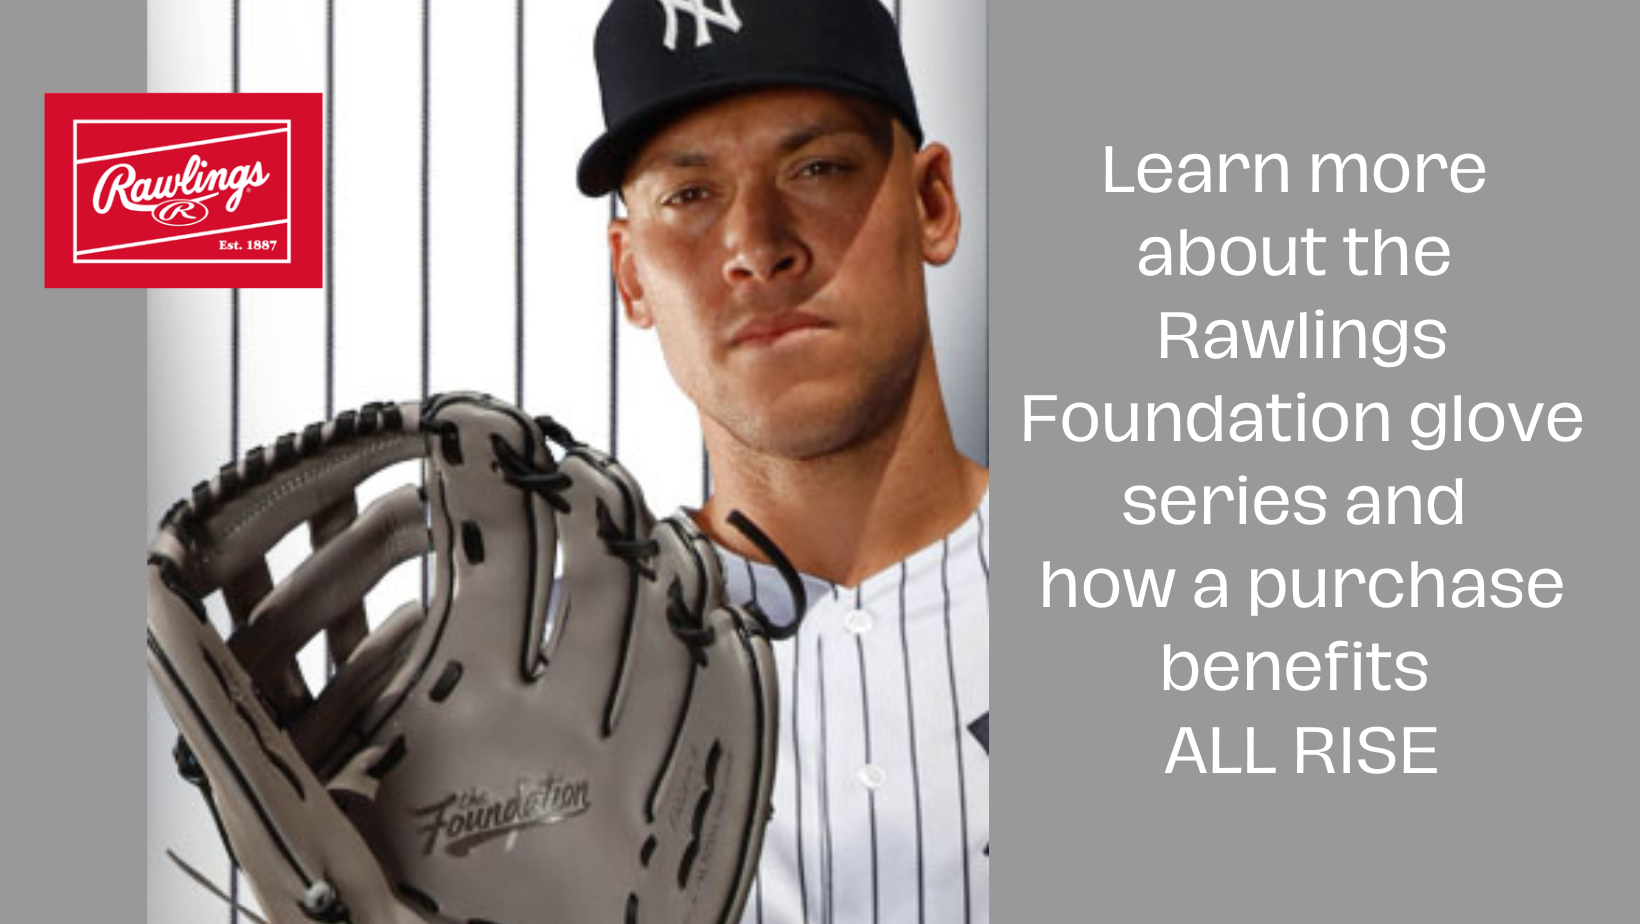 Aaron Judge with a Rawlings Foundation glove